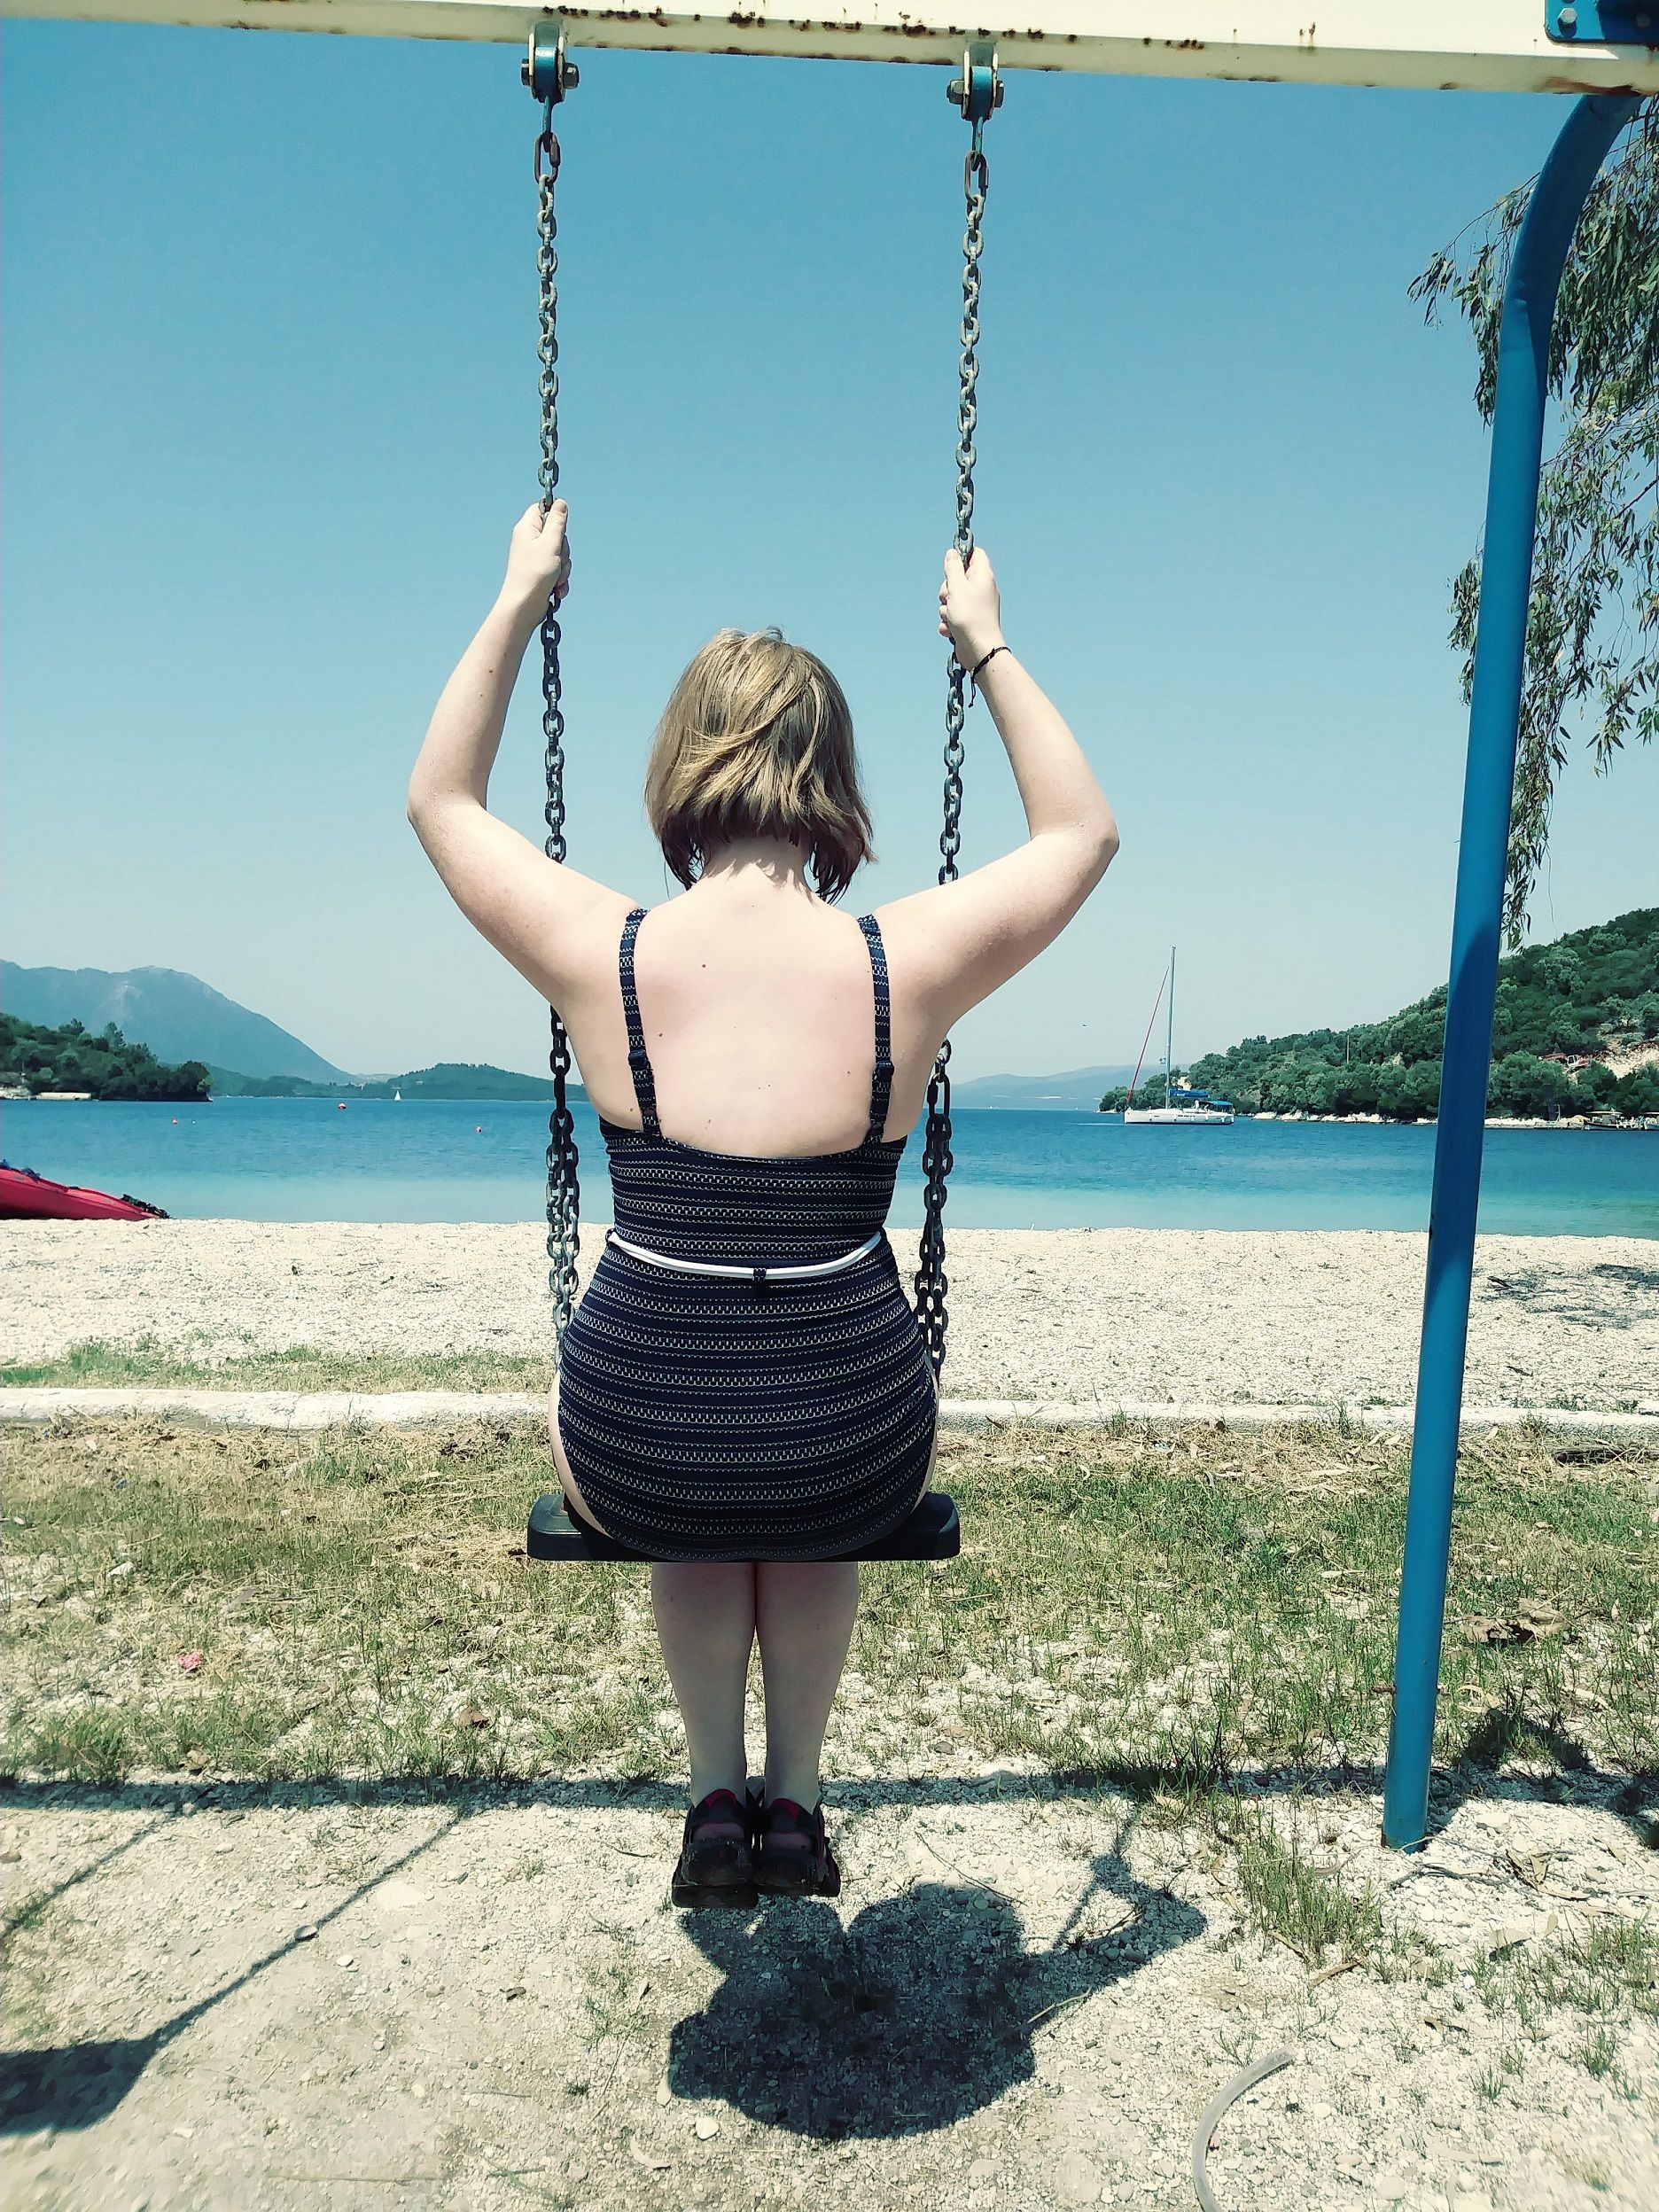 A woman on a swing in Meganisi, Greece